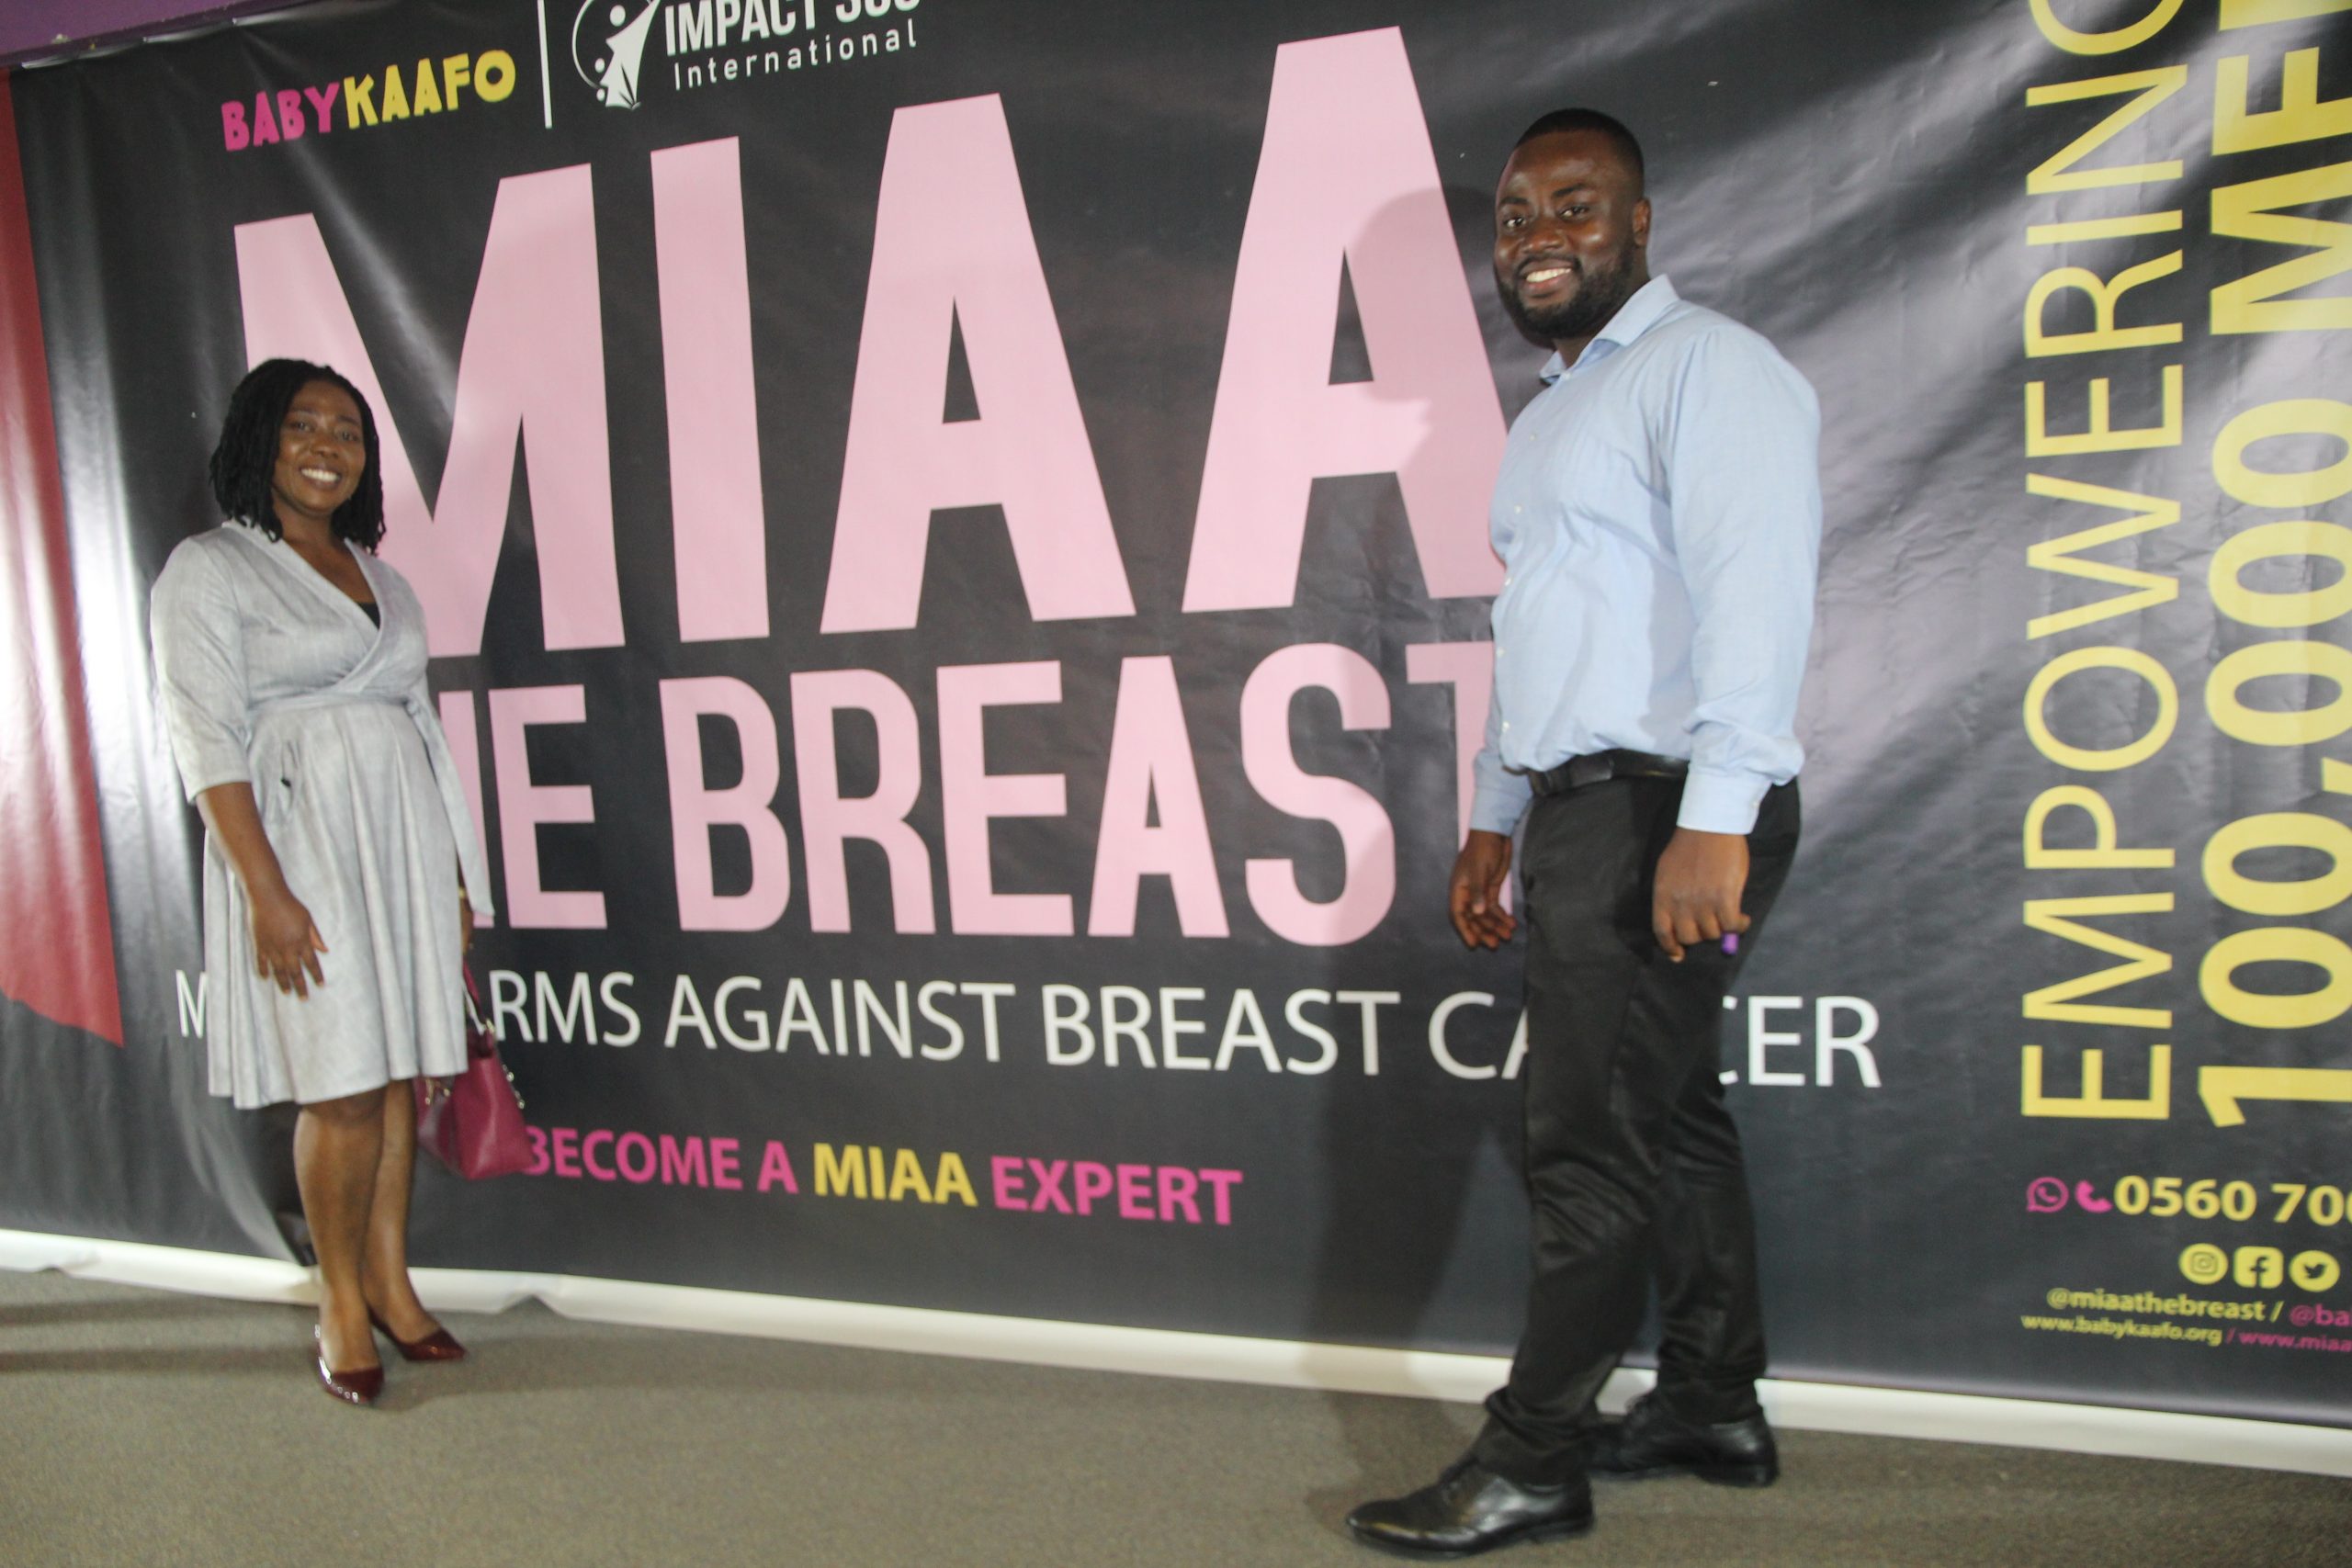 ‘MIAA’ Breasts Campaign Empowers Men To Examine Women For Breast Cancer